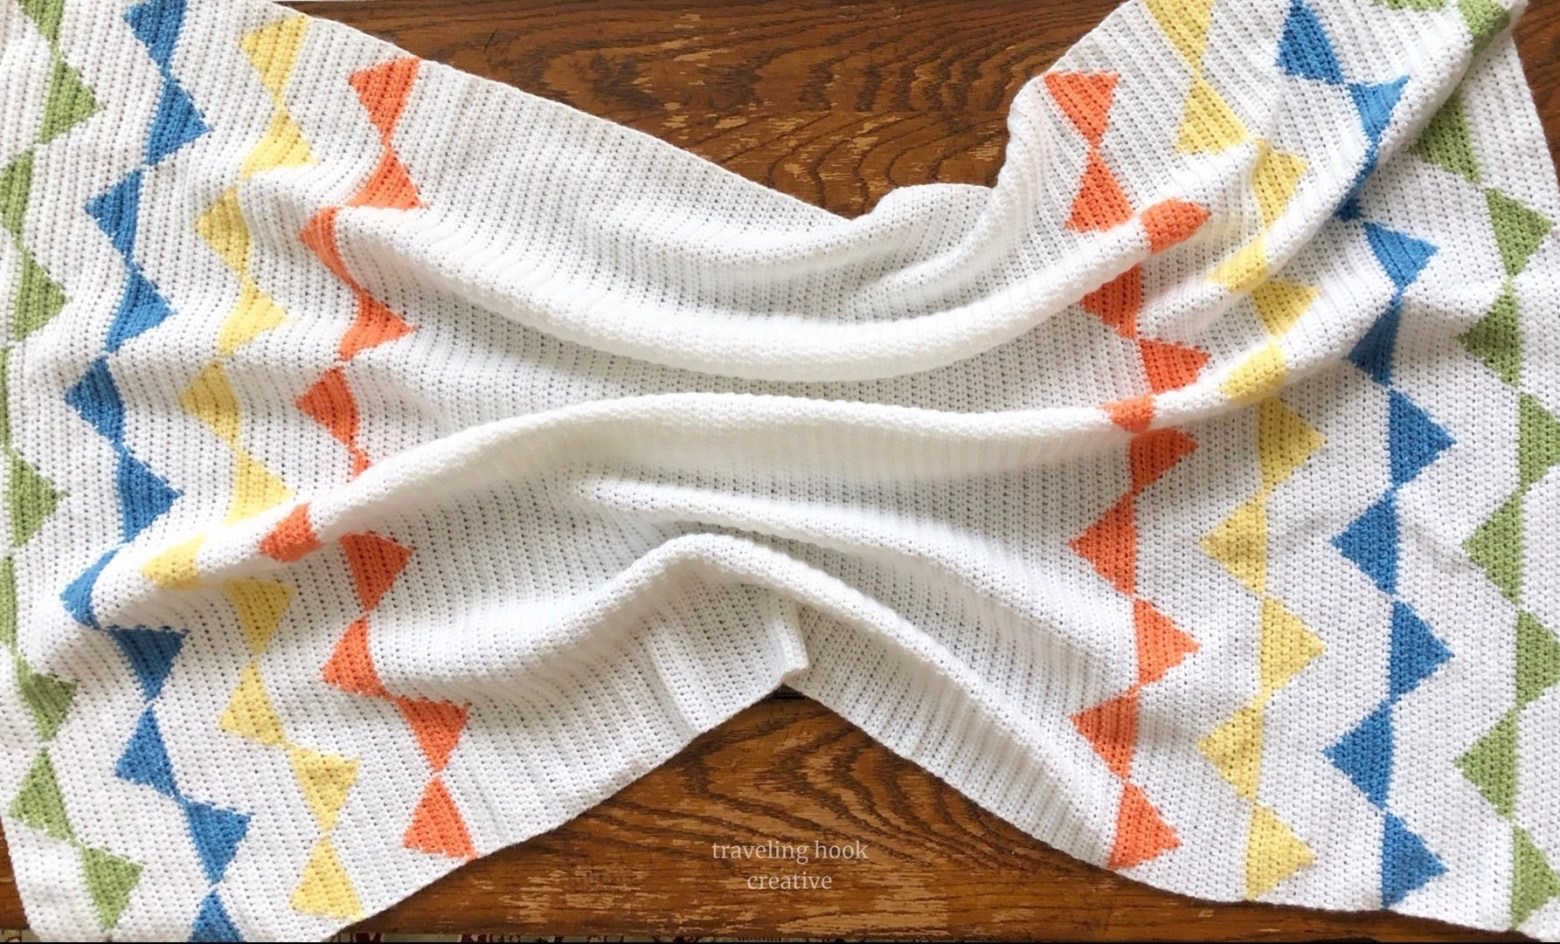 18 Free Crochet Baby Blanket Patterns. Need a gift for your next baby shower? Try one of these FREE baby blankie patterns to crochet for boys and girls. | TLYCBlog.com